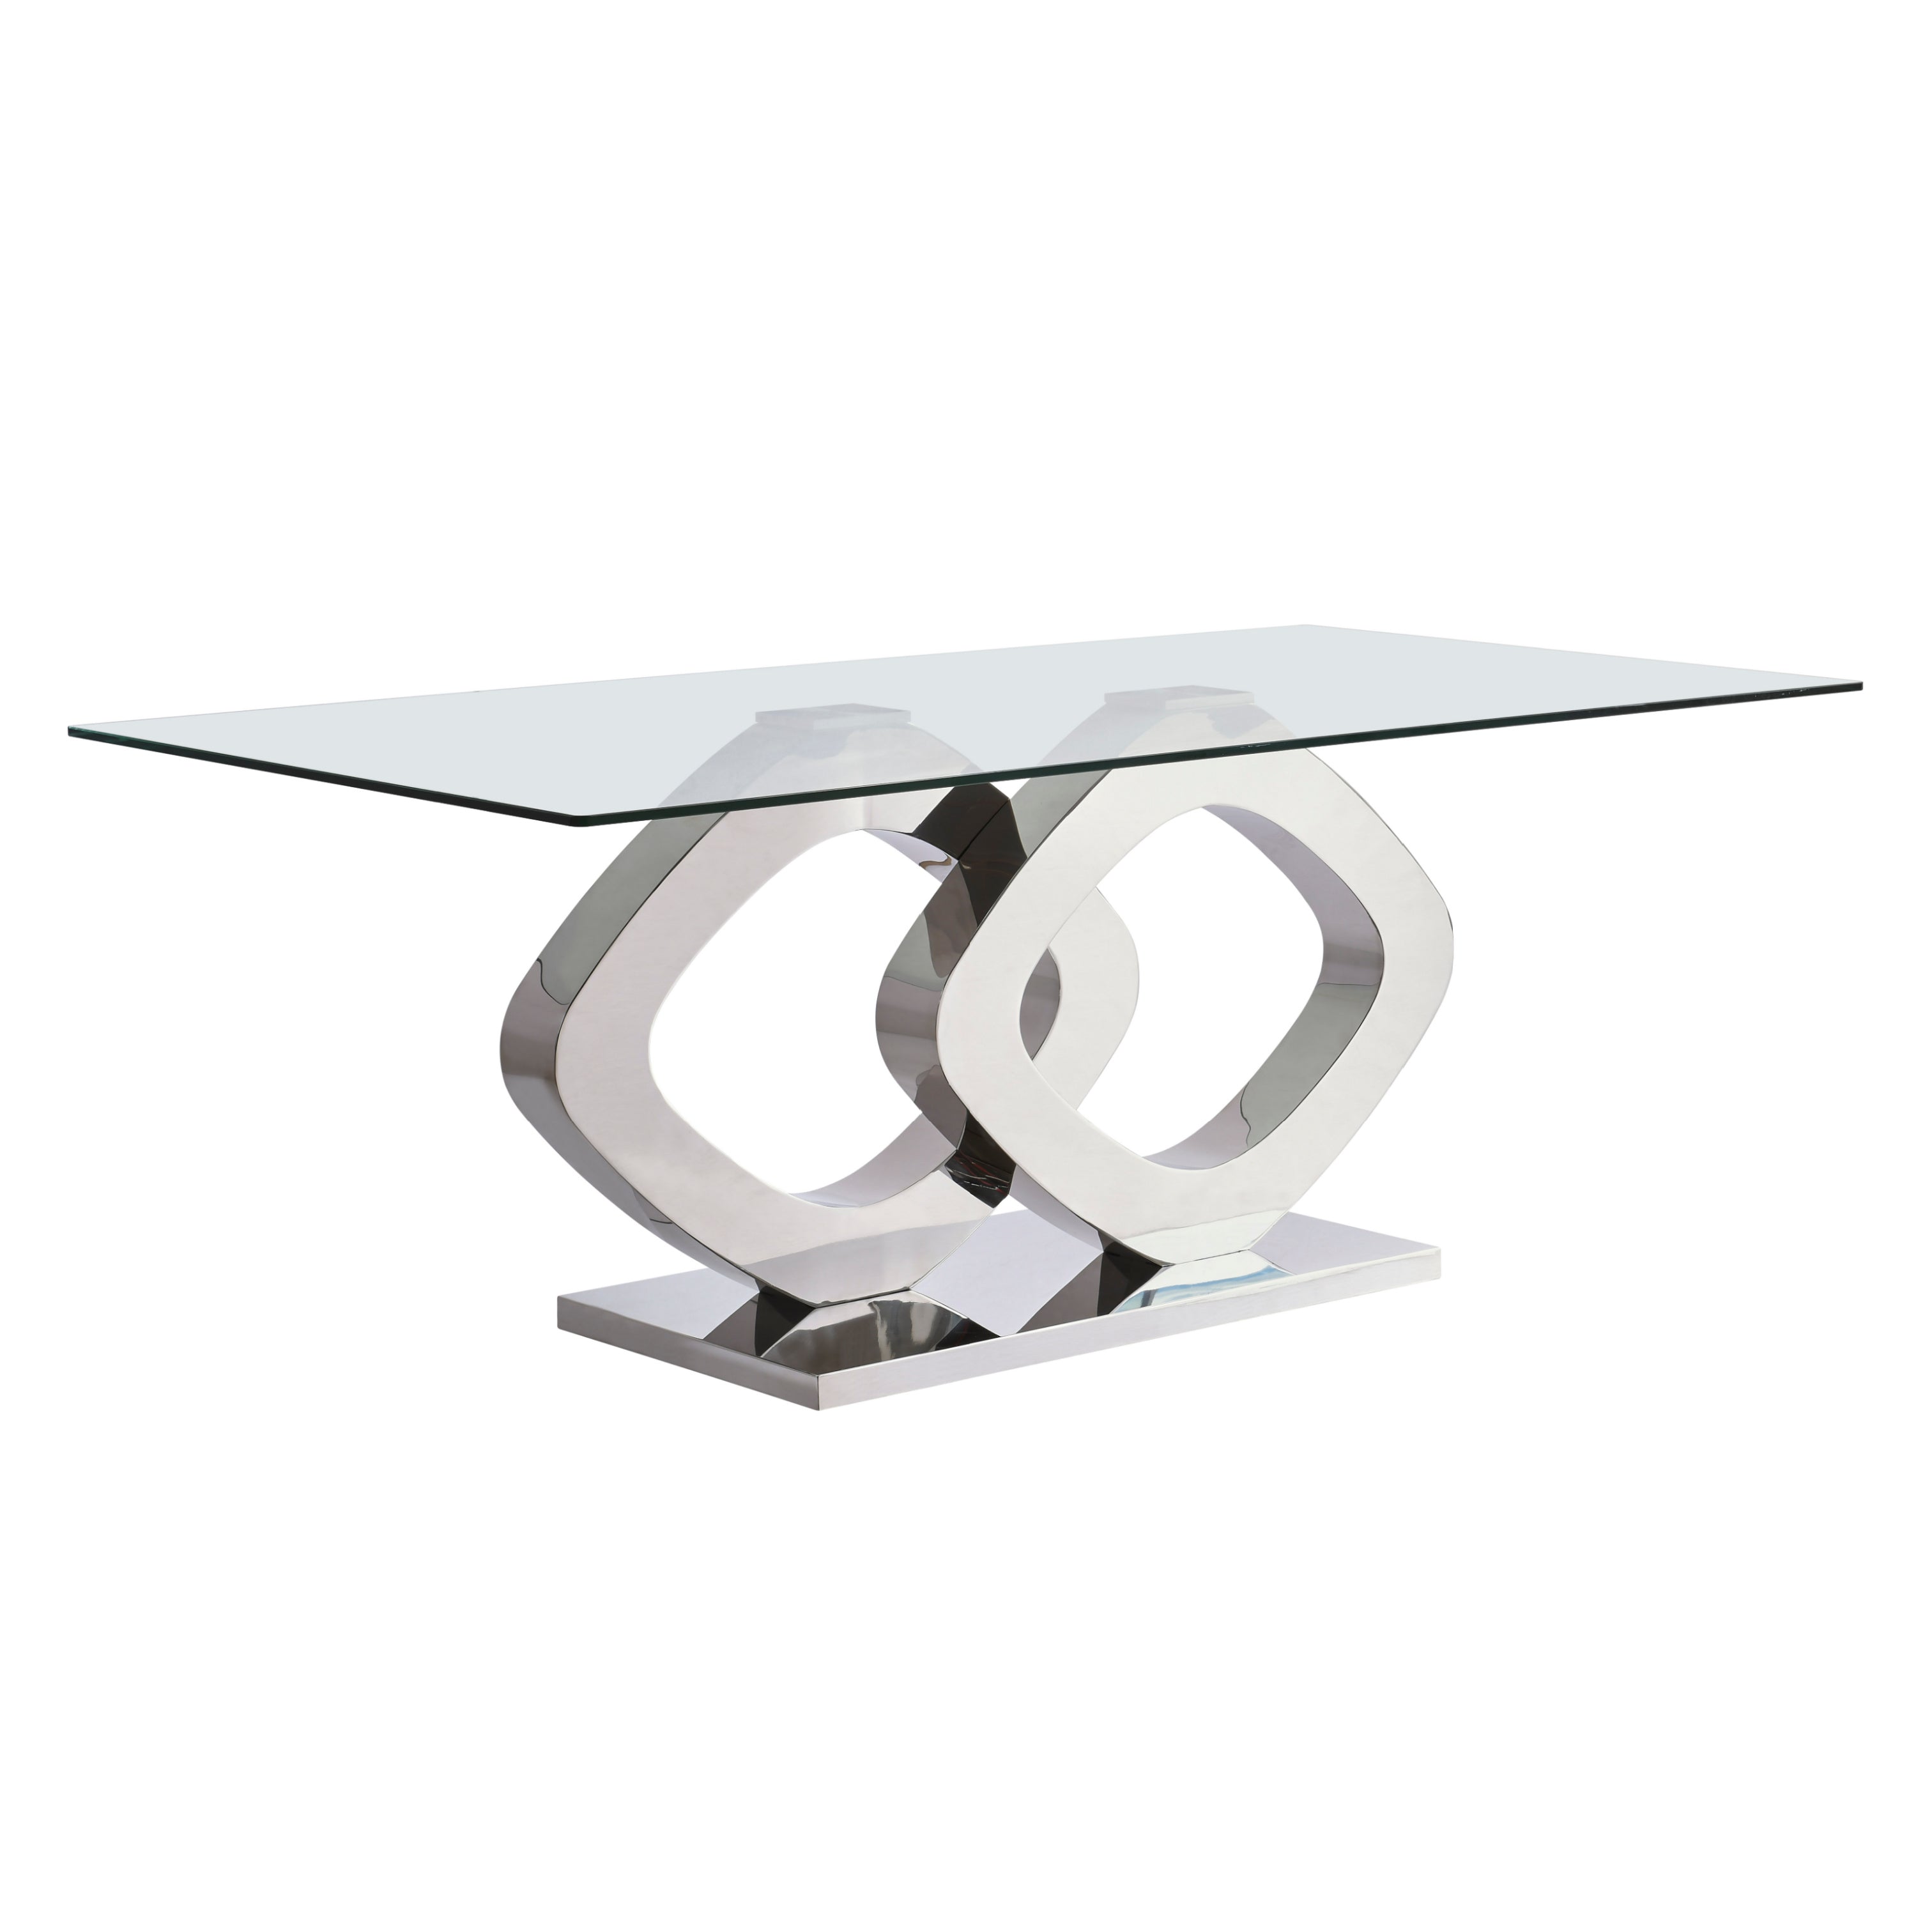 Mint Collection - Cesena 2m Dining Table - Design 1 | The Oak Outlet Co.